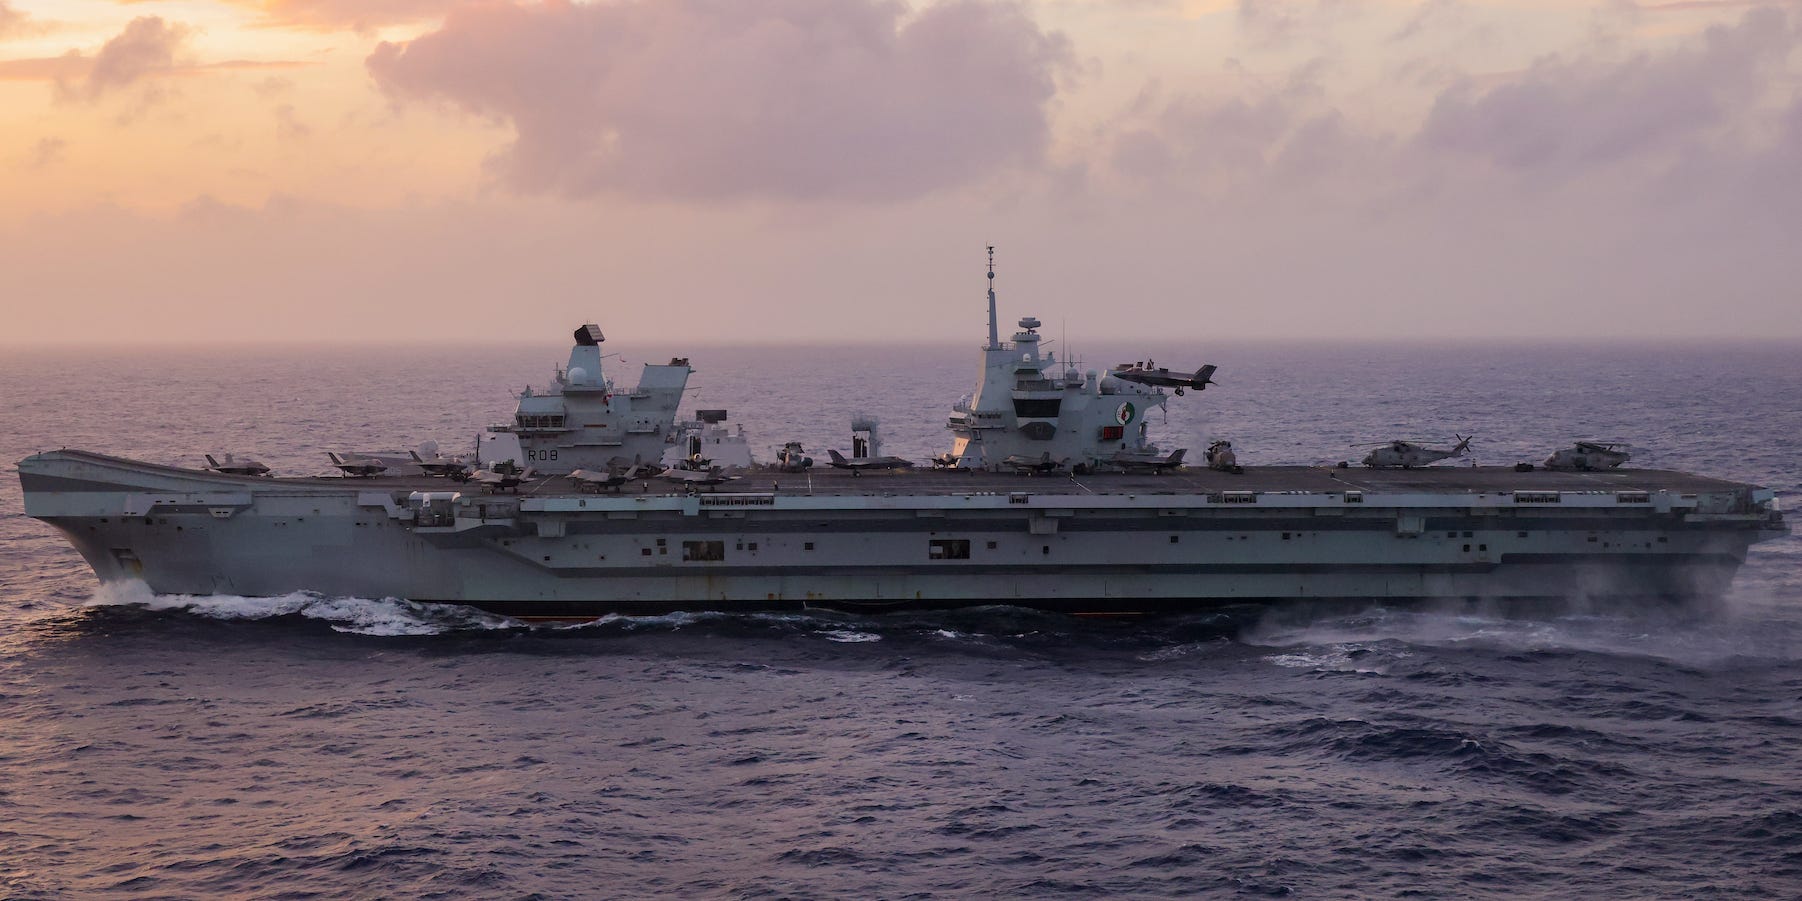 HMS Queen Elizabeth aircraft carrier in South China Sea